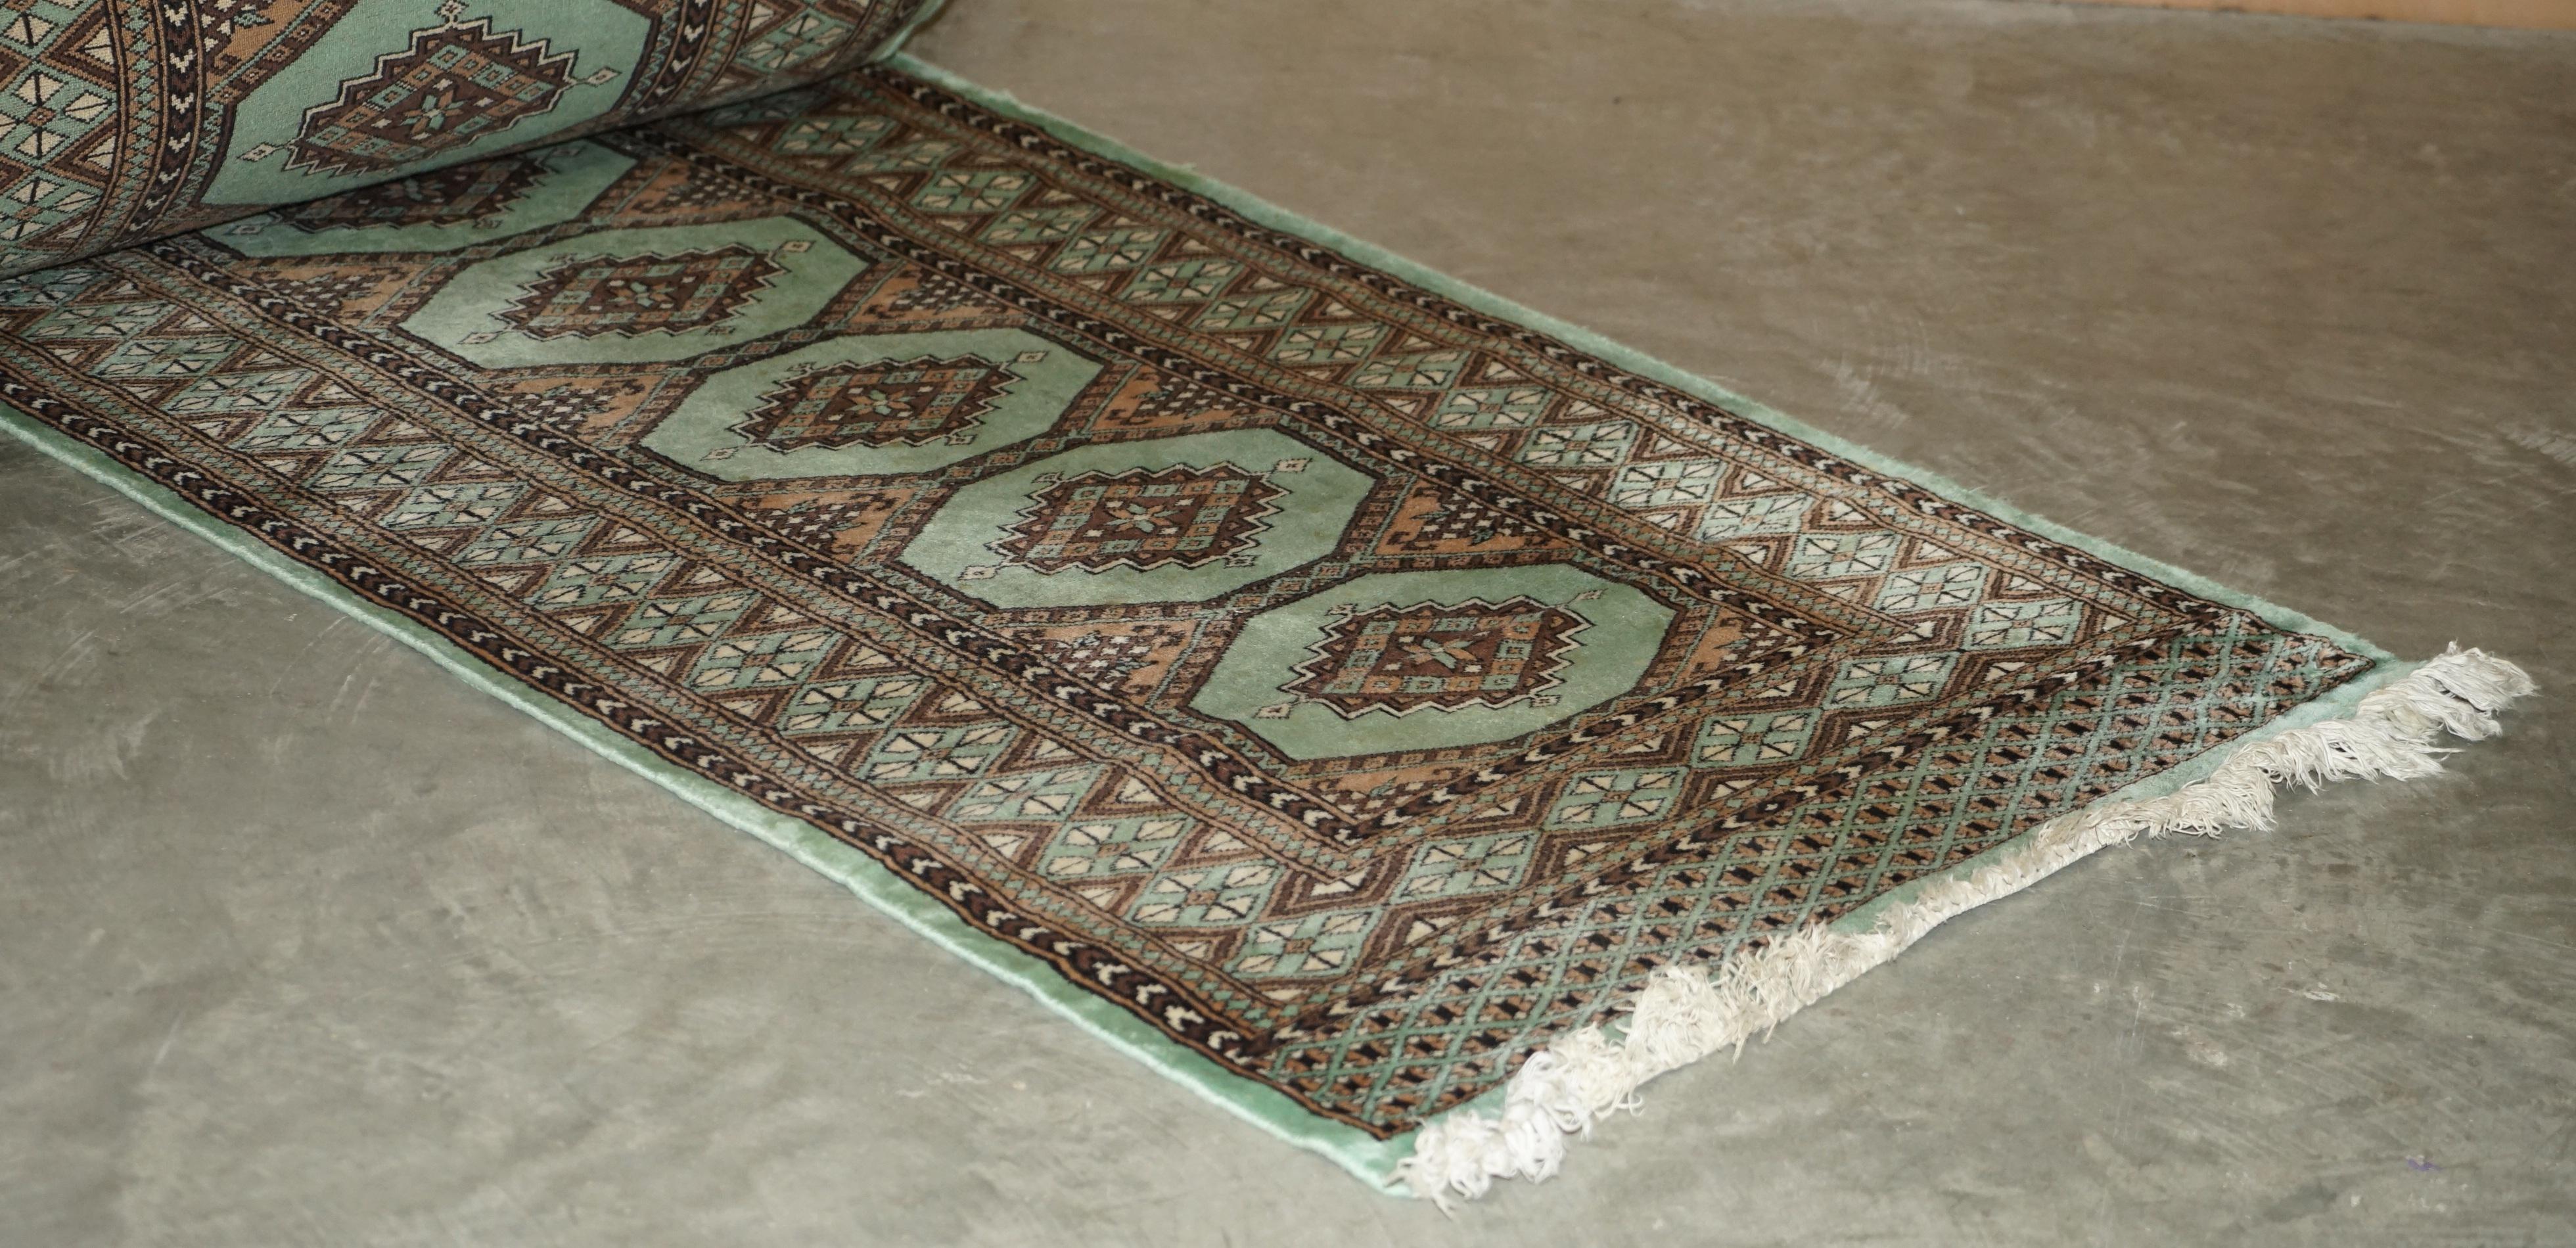 Royal house antiques.

Royal house antiques is delighted to offer this exceptionally long 22 meter runner carpet rug

Please note the delivery fee listed is just a guide, it covers within the M25 only for the UK and local Europe only for